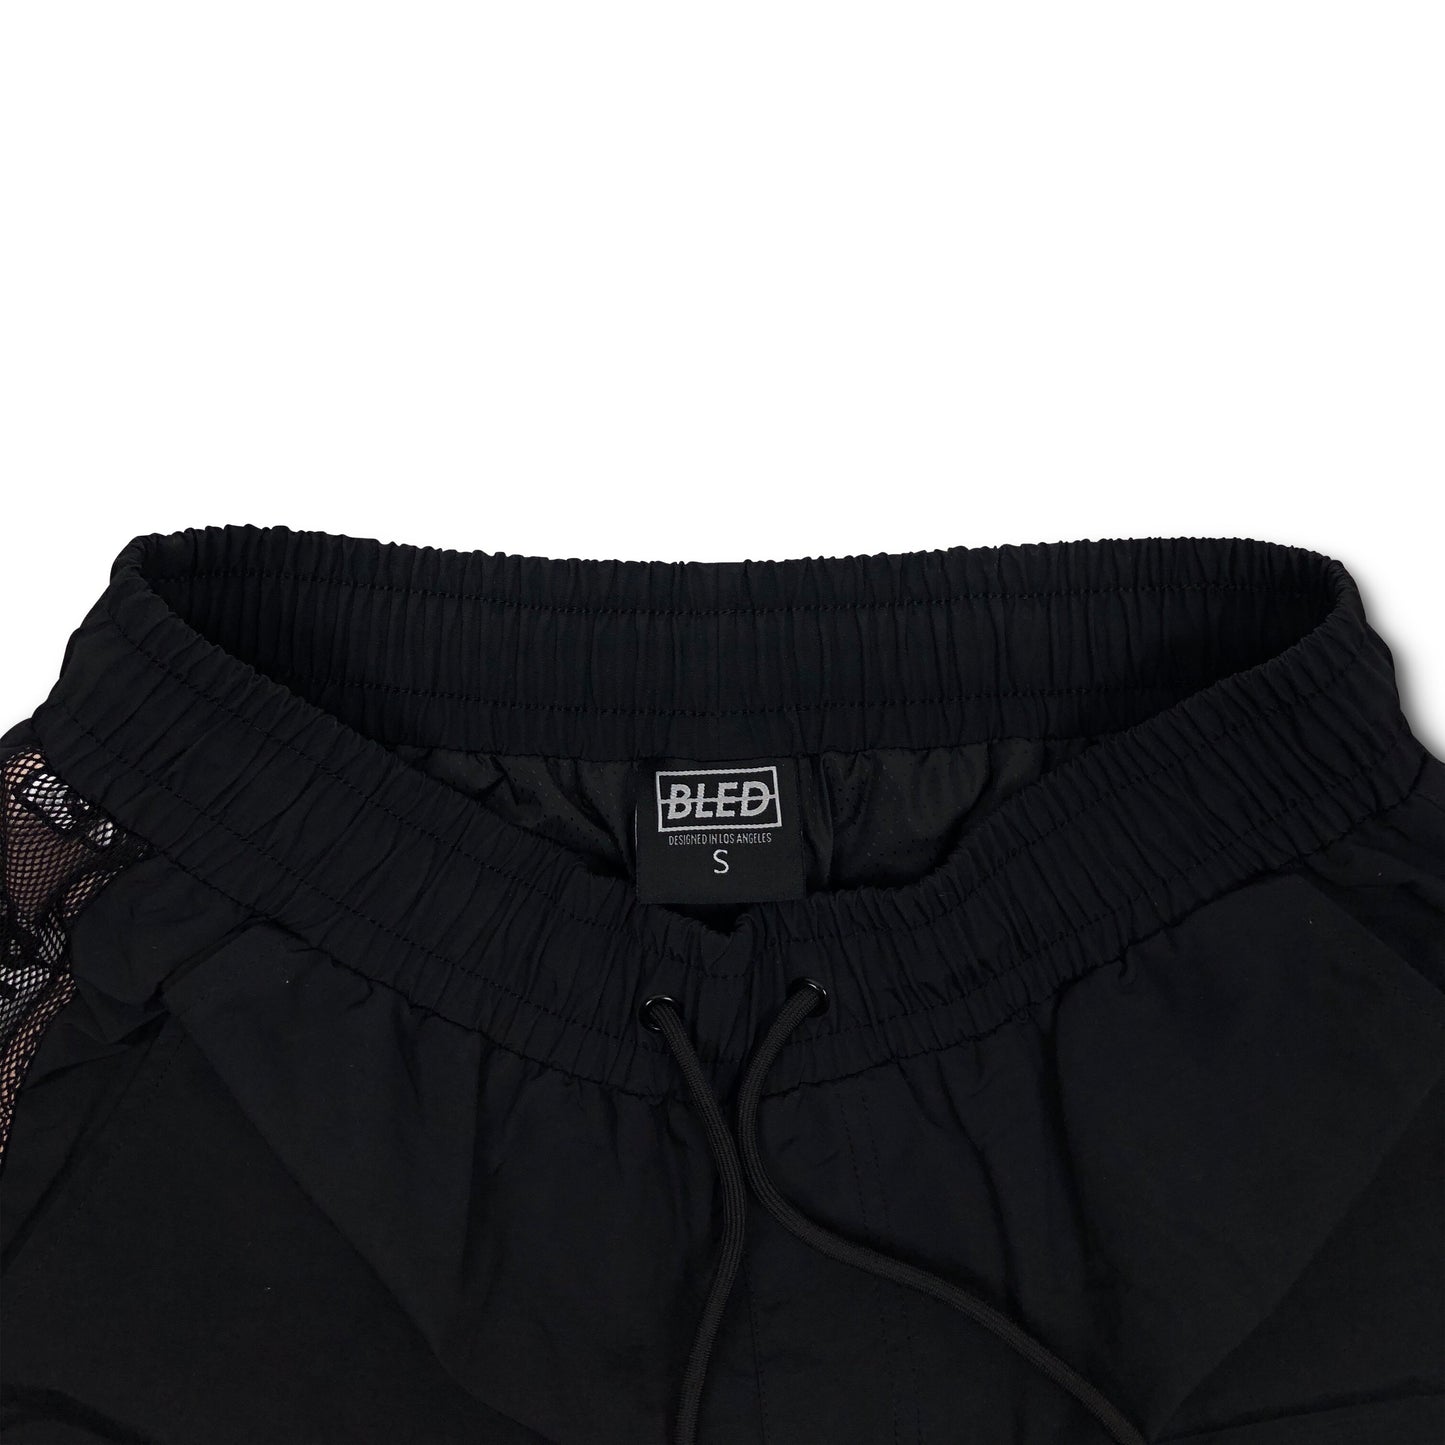 Bled Bledwear Coral Pink Black White Tracksuit Shorts Short Hypebeast Streetwear